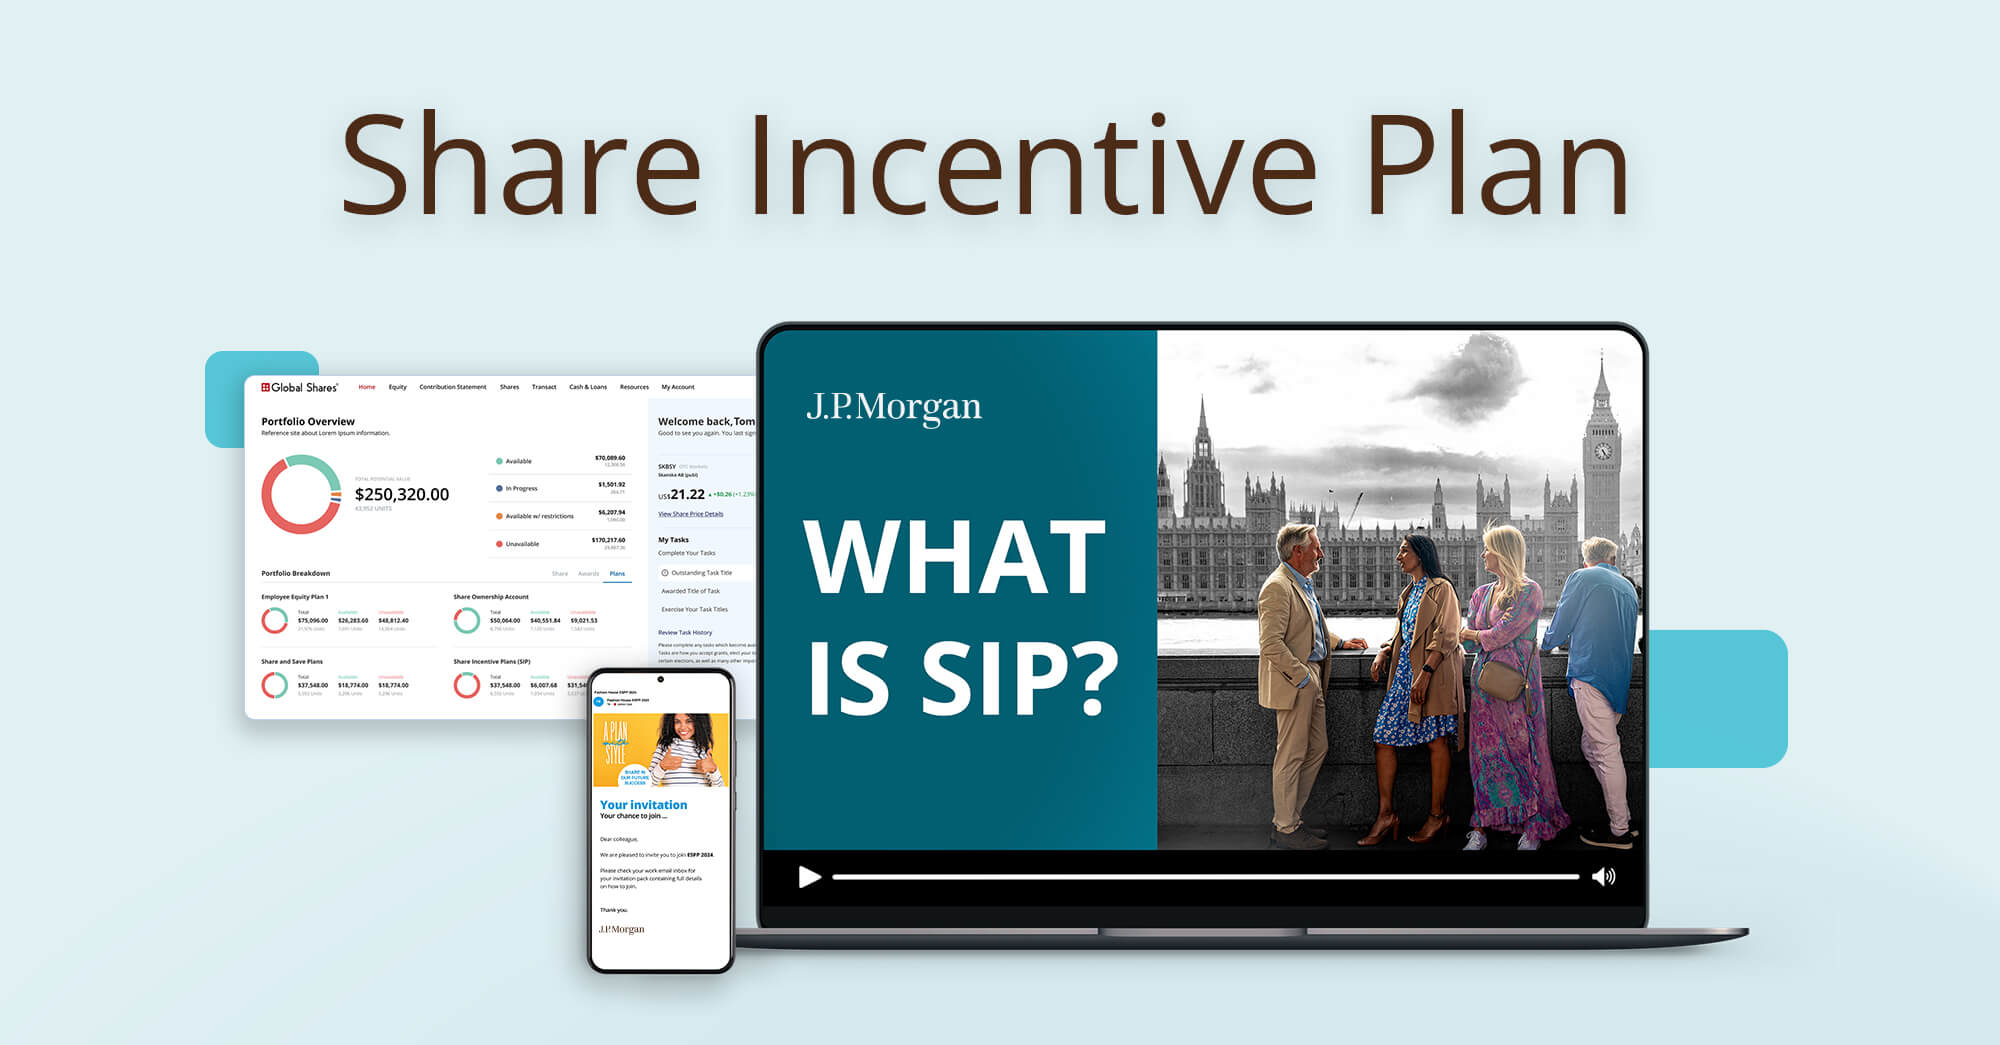 How a Share Incentive Plan (SIP) works